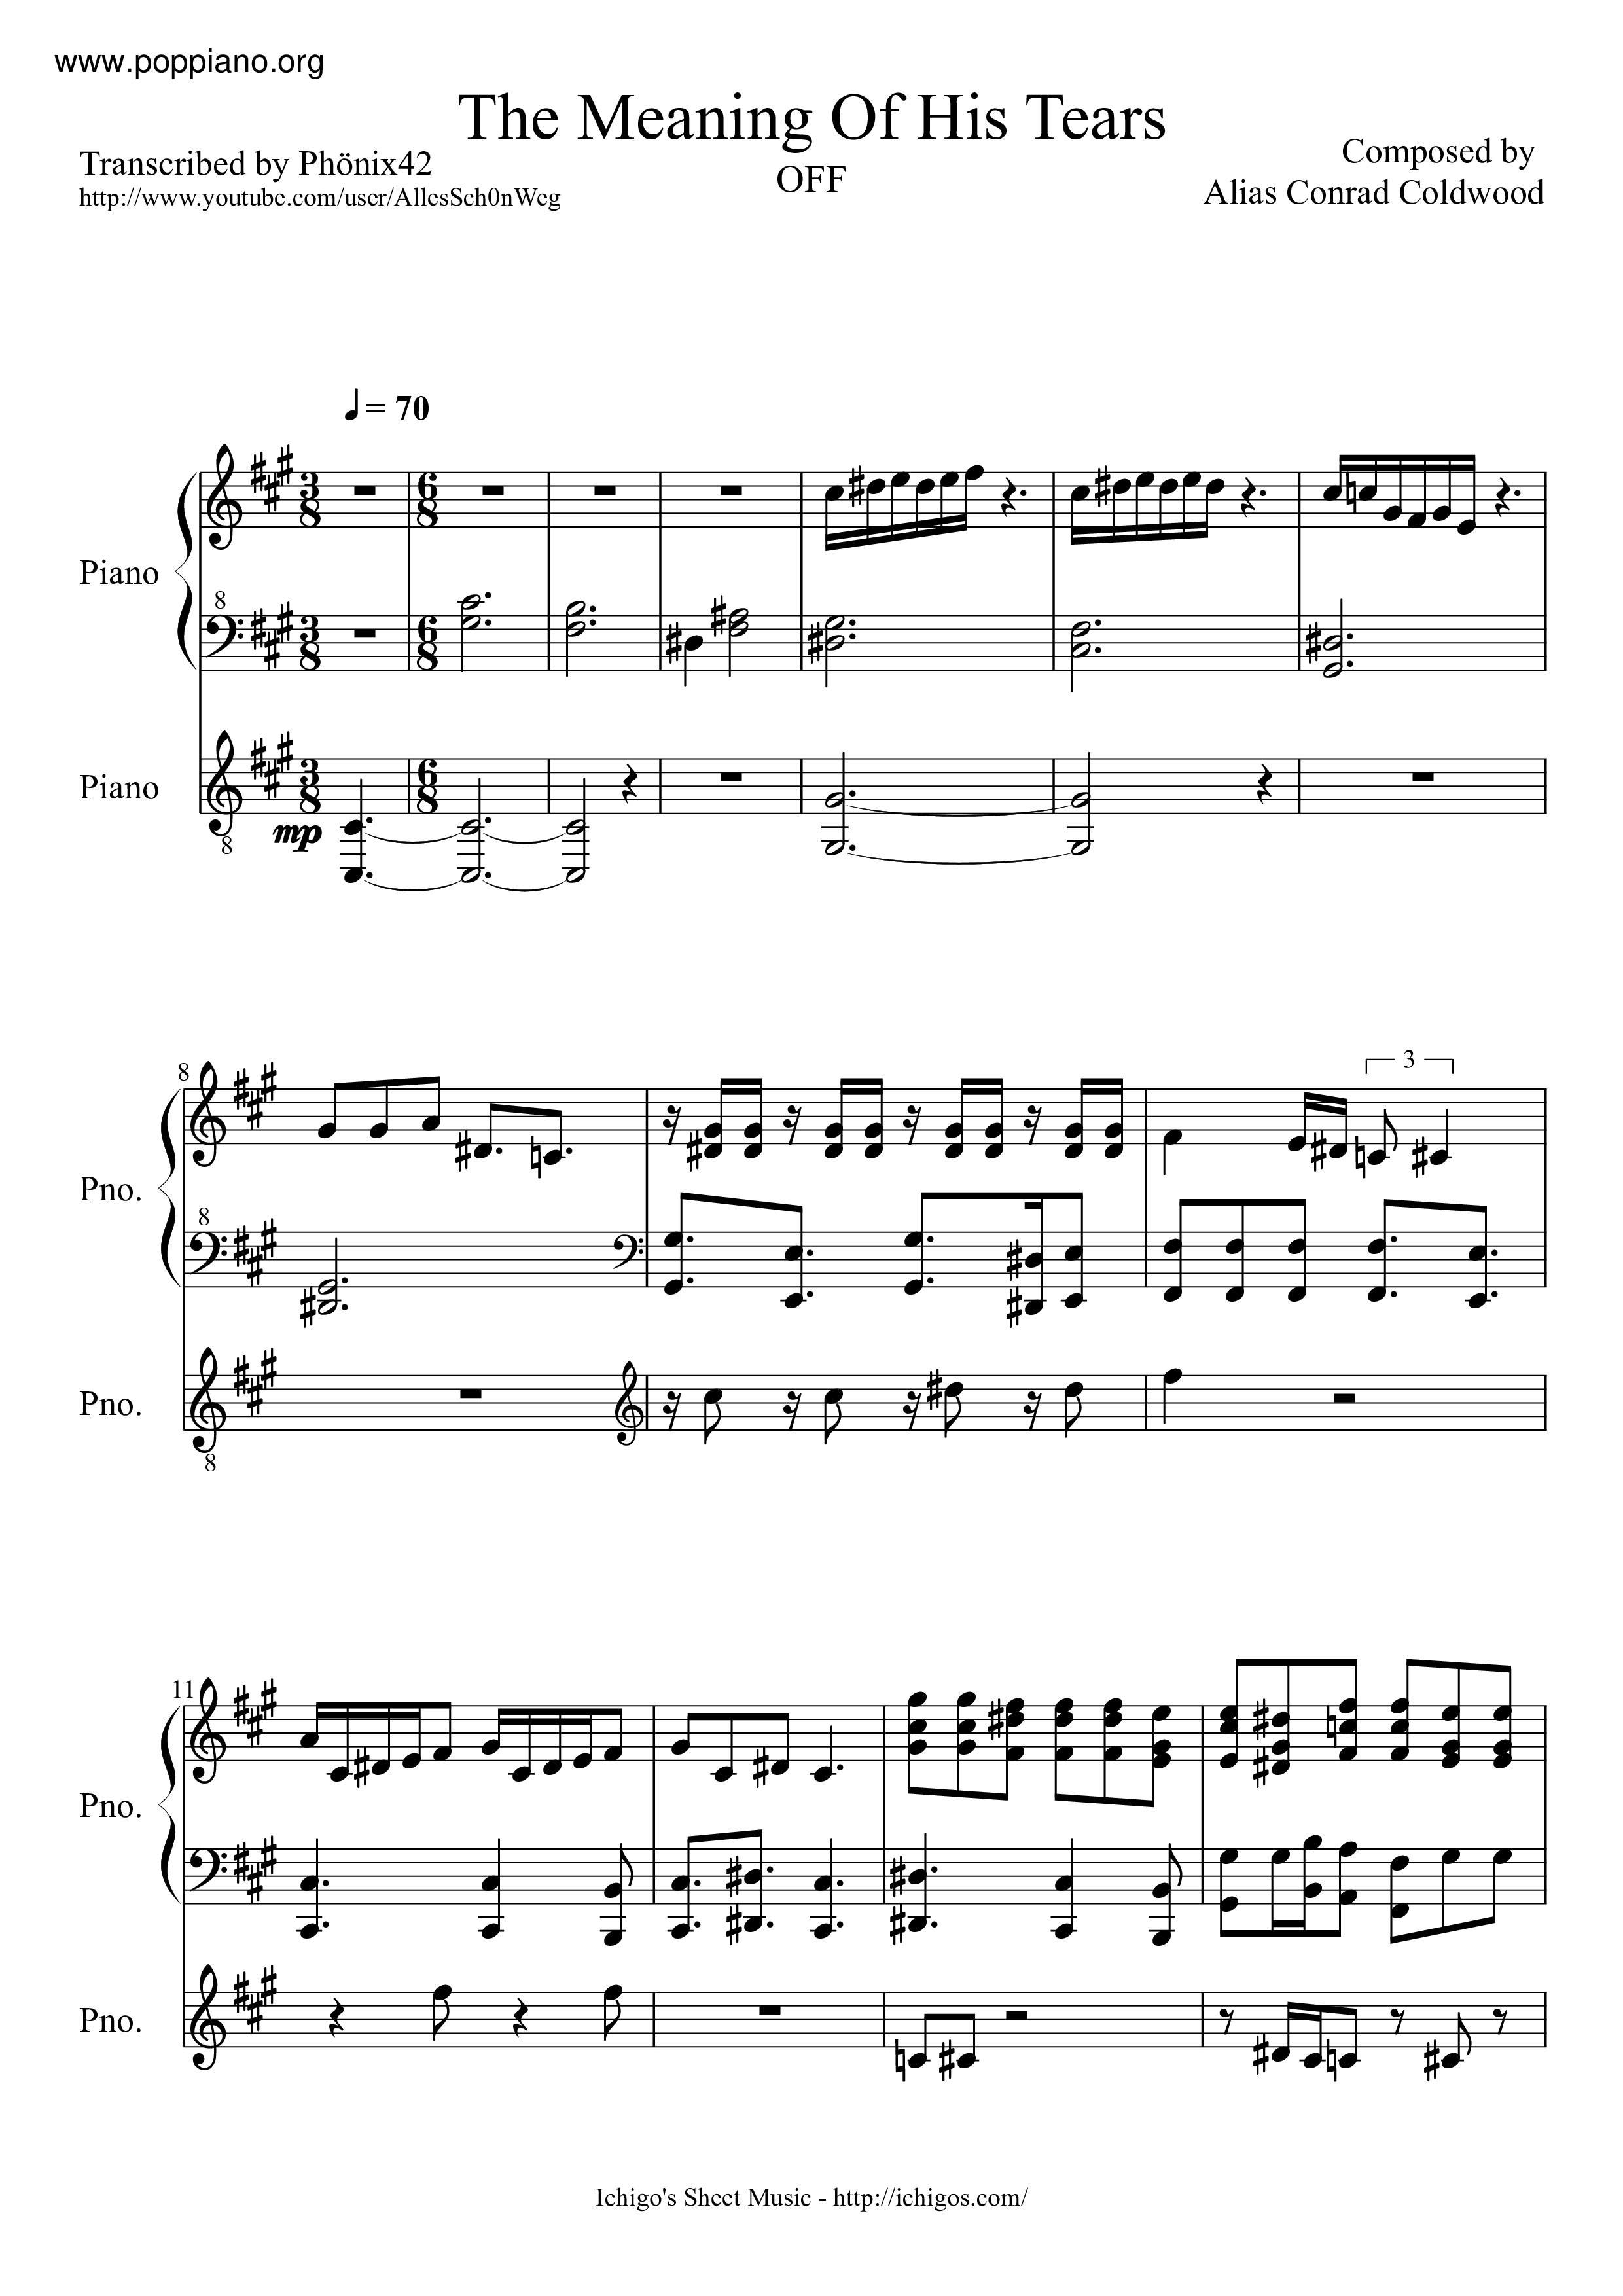 The Meaning of His Tears – Alias Conrad Coldwood Sheet music for Piano  (Solo)